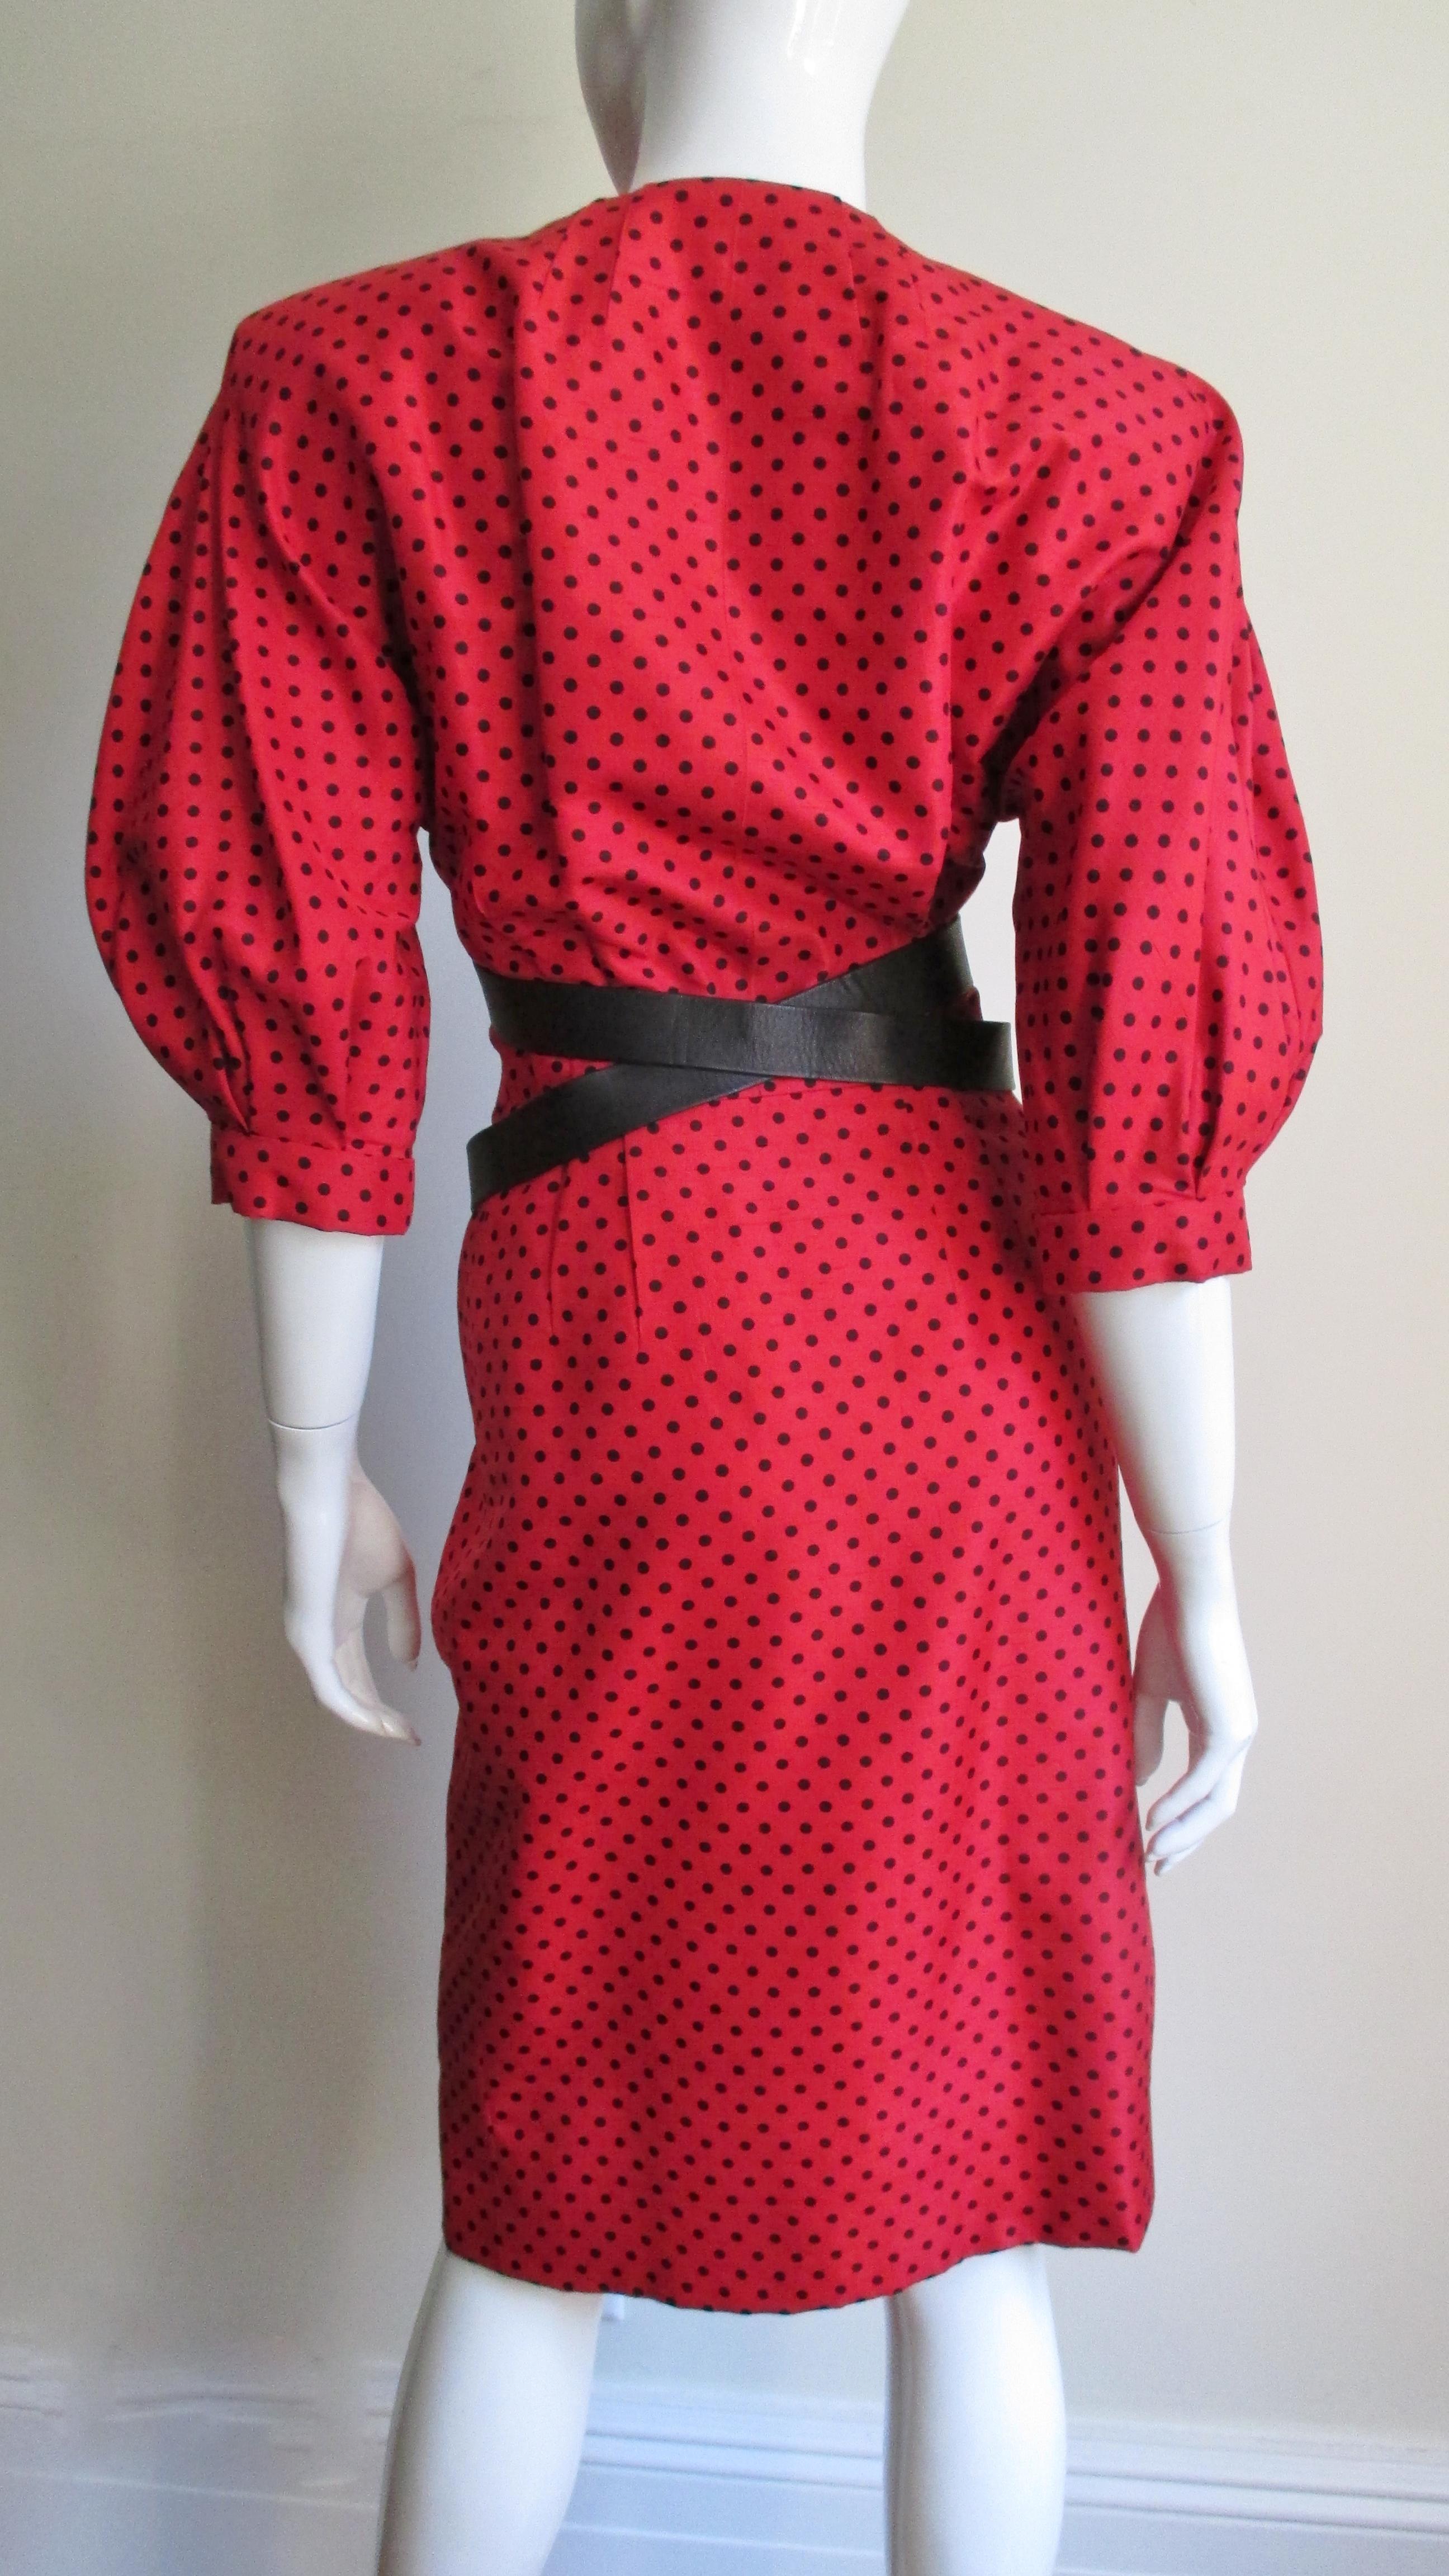 Jacqueline de Ribes Silk Dress With Leather Straps 1980s For Sale 3